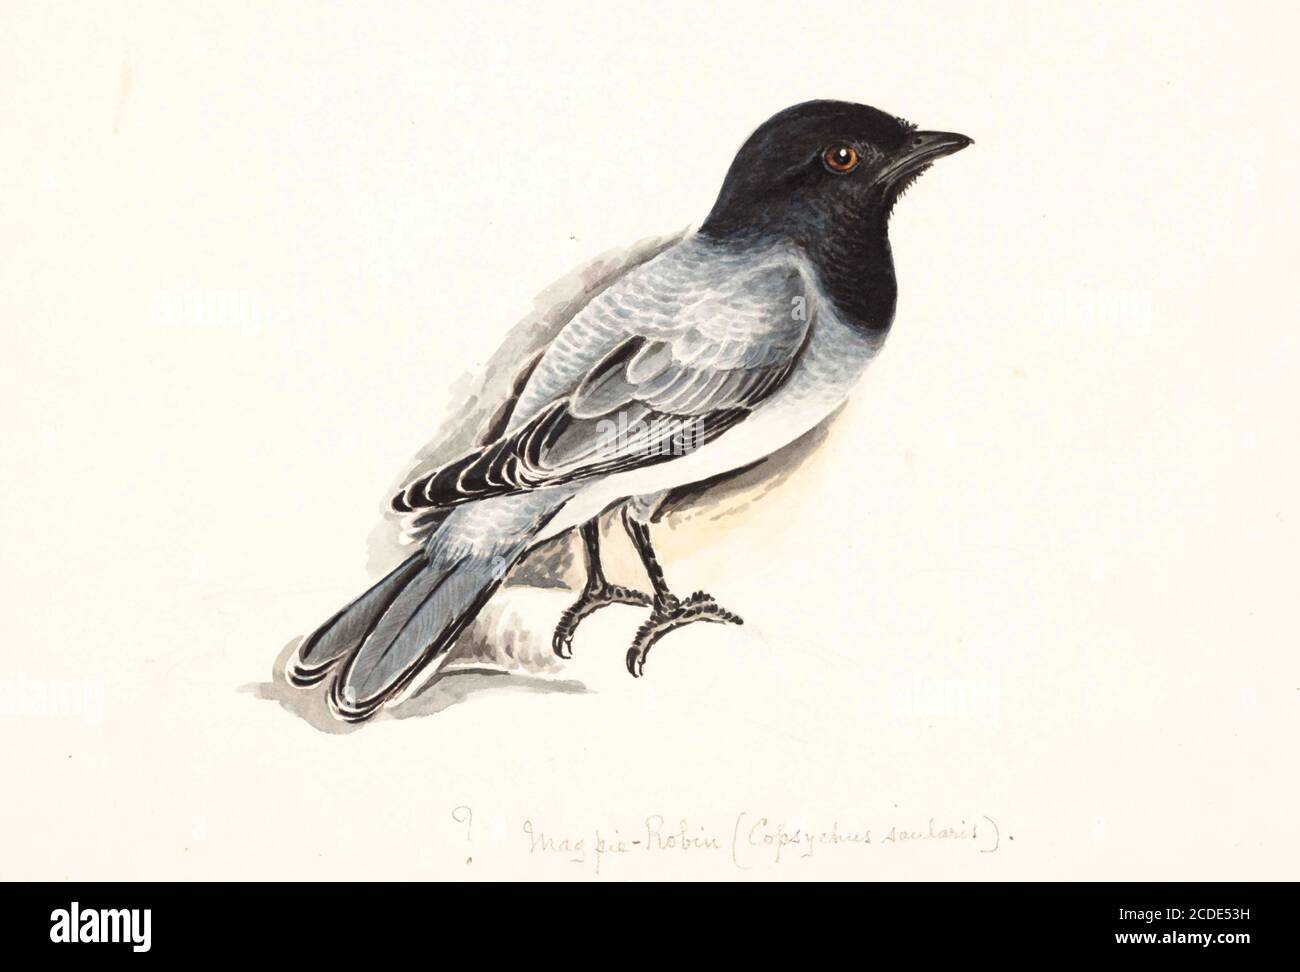 black-headed cuckooshrike (Lalage melanoptera syn Coracina melanoptera) is a species of cuckooshrike found in the Indian Subcontinent and Southeast Asia. 18th century watercolor painting by Elizabeth Gwillim. Lady Elizabeth Symonds Gwillim (21 April 1763 – 21 December 1807) was an artist married to Sir Henry Gwillim, Puisne Judge at the Madras high court until 1808. Lady Gwillim painted a series of about 200 watercolours of Indian birds. Produced about 20 years before John James Audubon, her work has been acclaimed for its accuracy and natural postures as they were drawn from observations of t Stock Photo